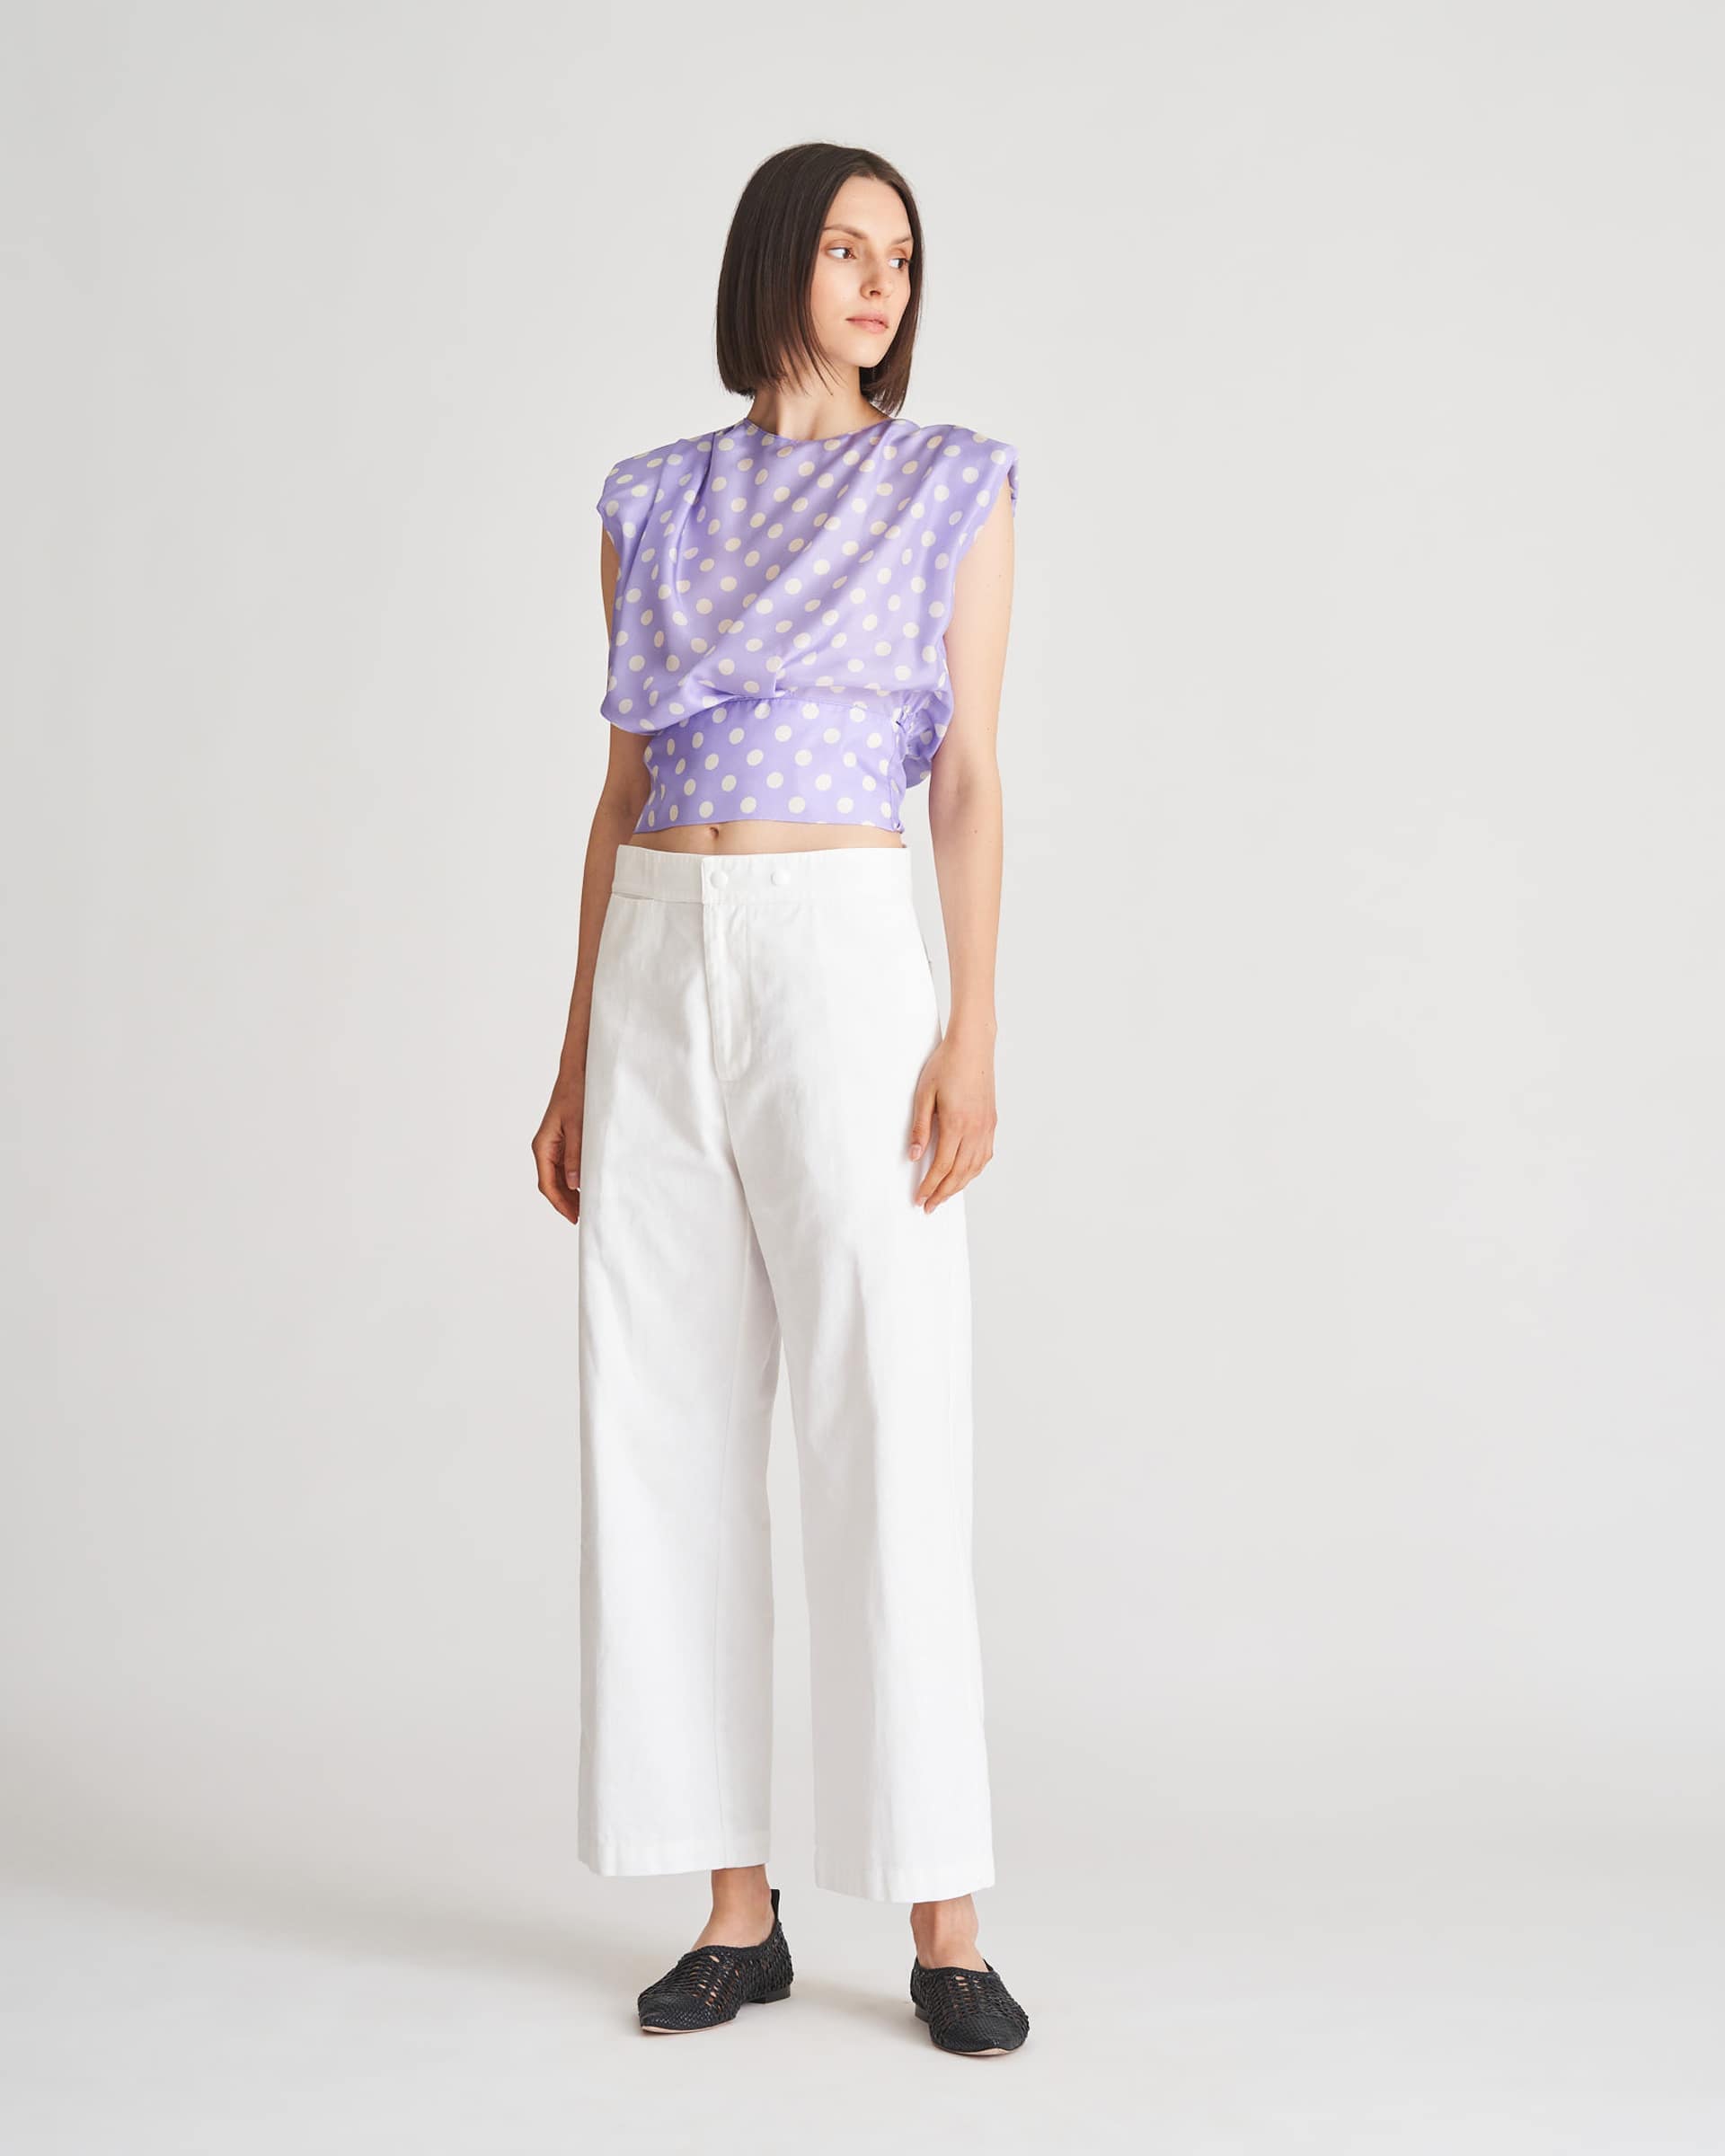 The Market Store | Short Silk Polka Dot Top With Bold Straps